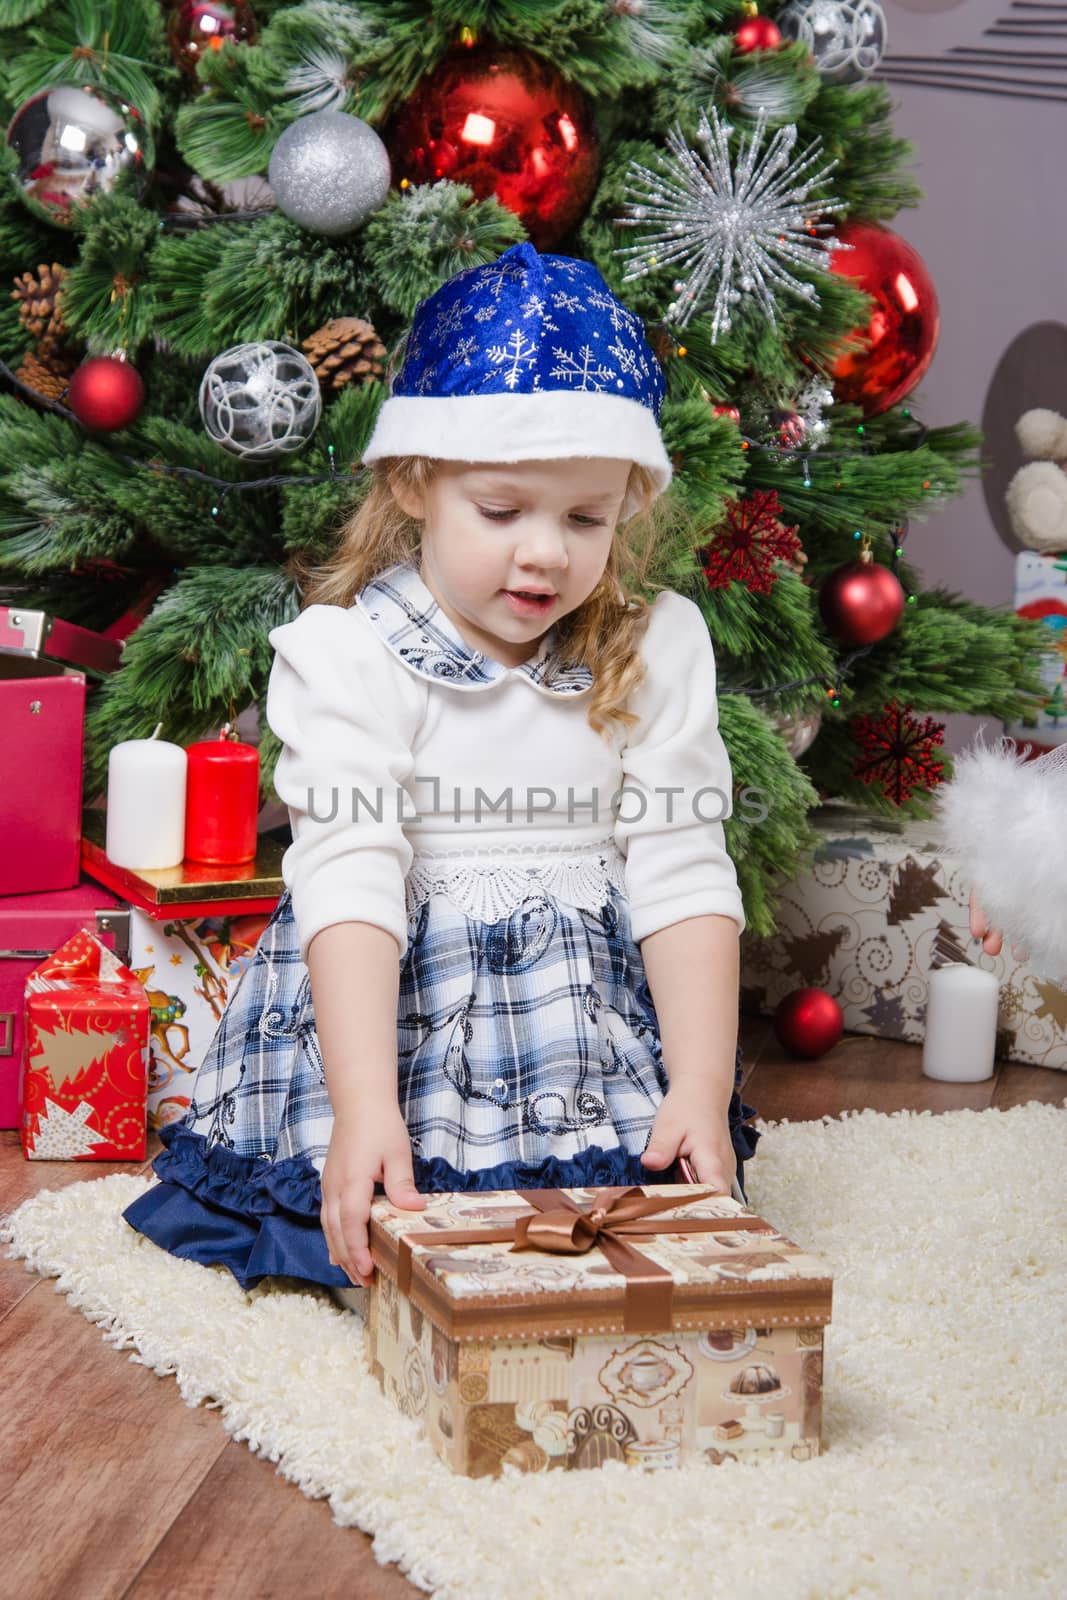 Girl sitting on a rug in a Christmas tree with gifts